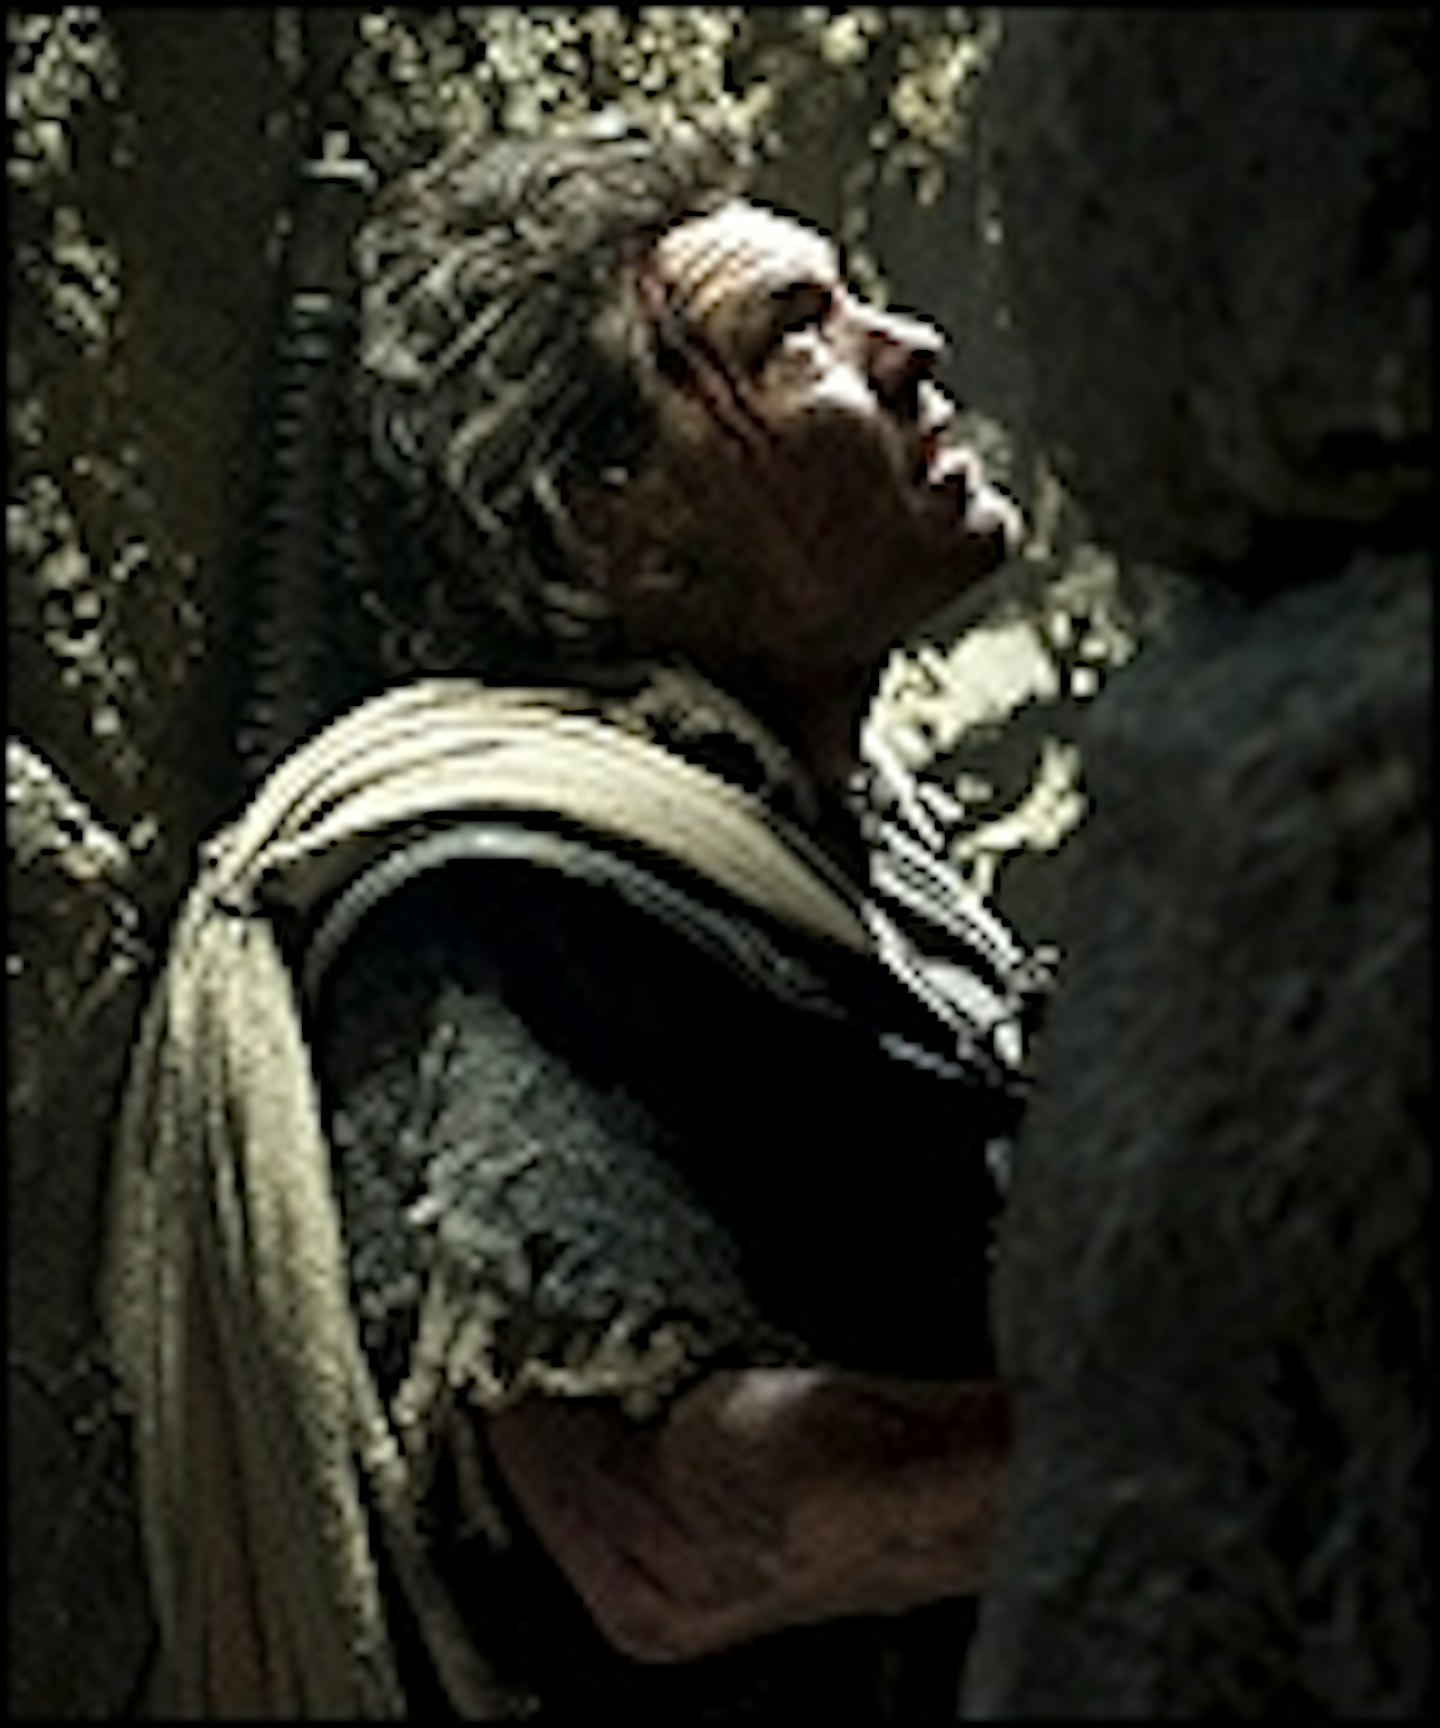 New Wrath Of The Titans Trailer Online